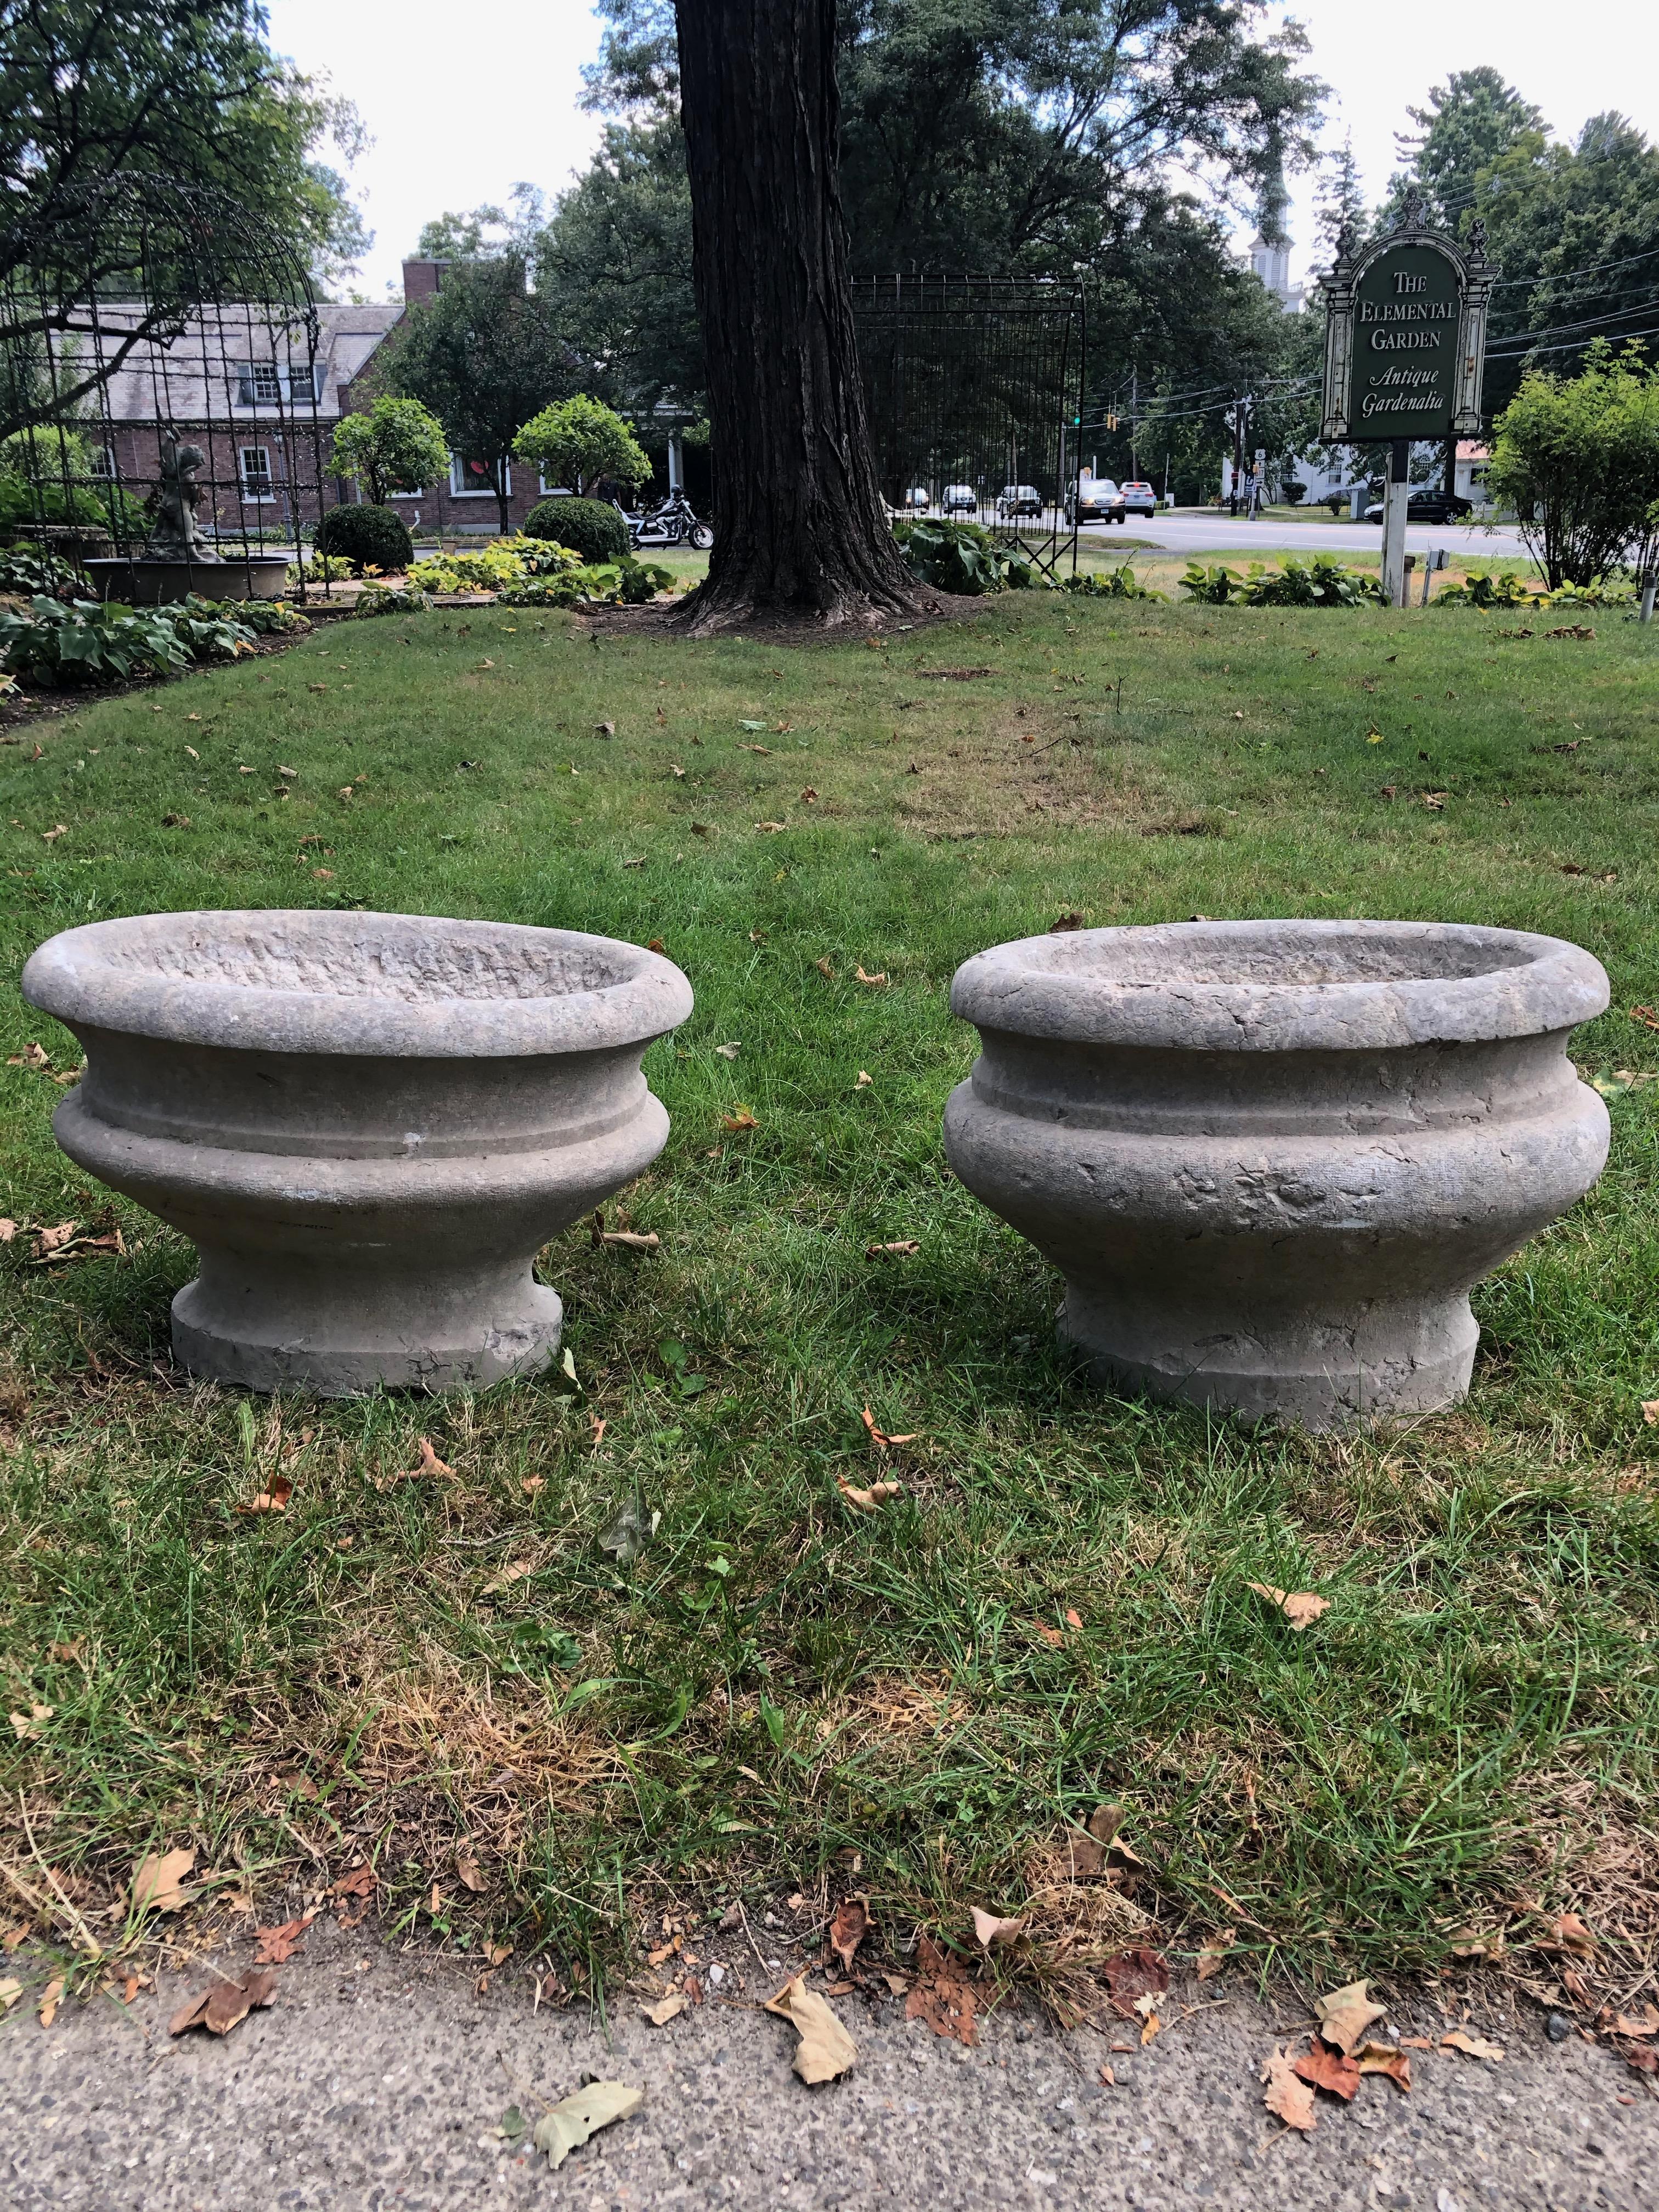 These stunning oval jardinieres on rounded feet were hand carved from single pieces of Pierre de Bourgogne (Burgundy Stone) circa 1800. In fine condition, there is one old chip to the rim of one jardiniere and a nibble to one foot shown in photos.